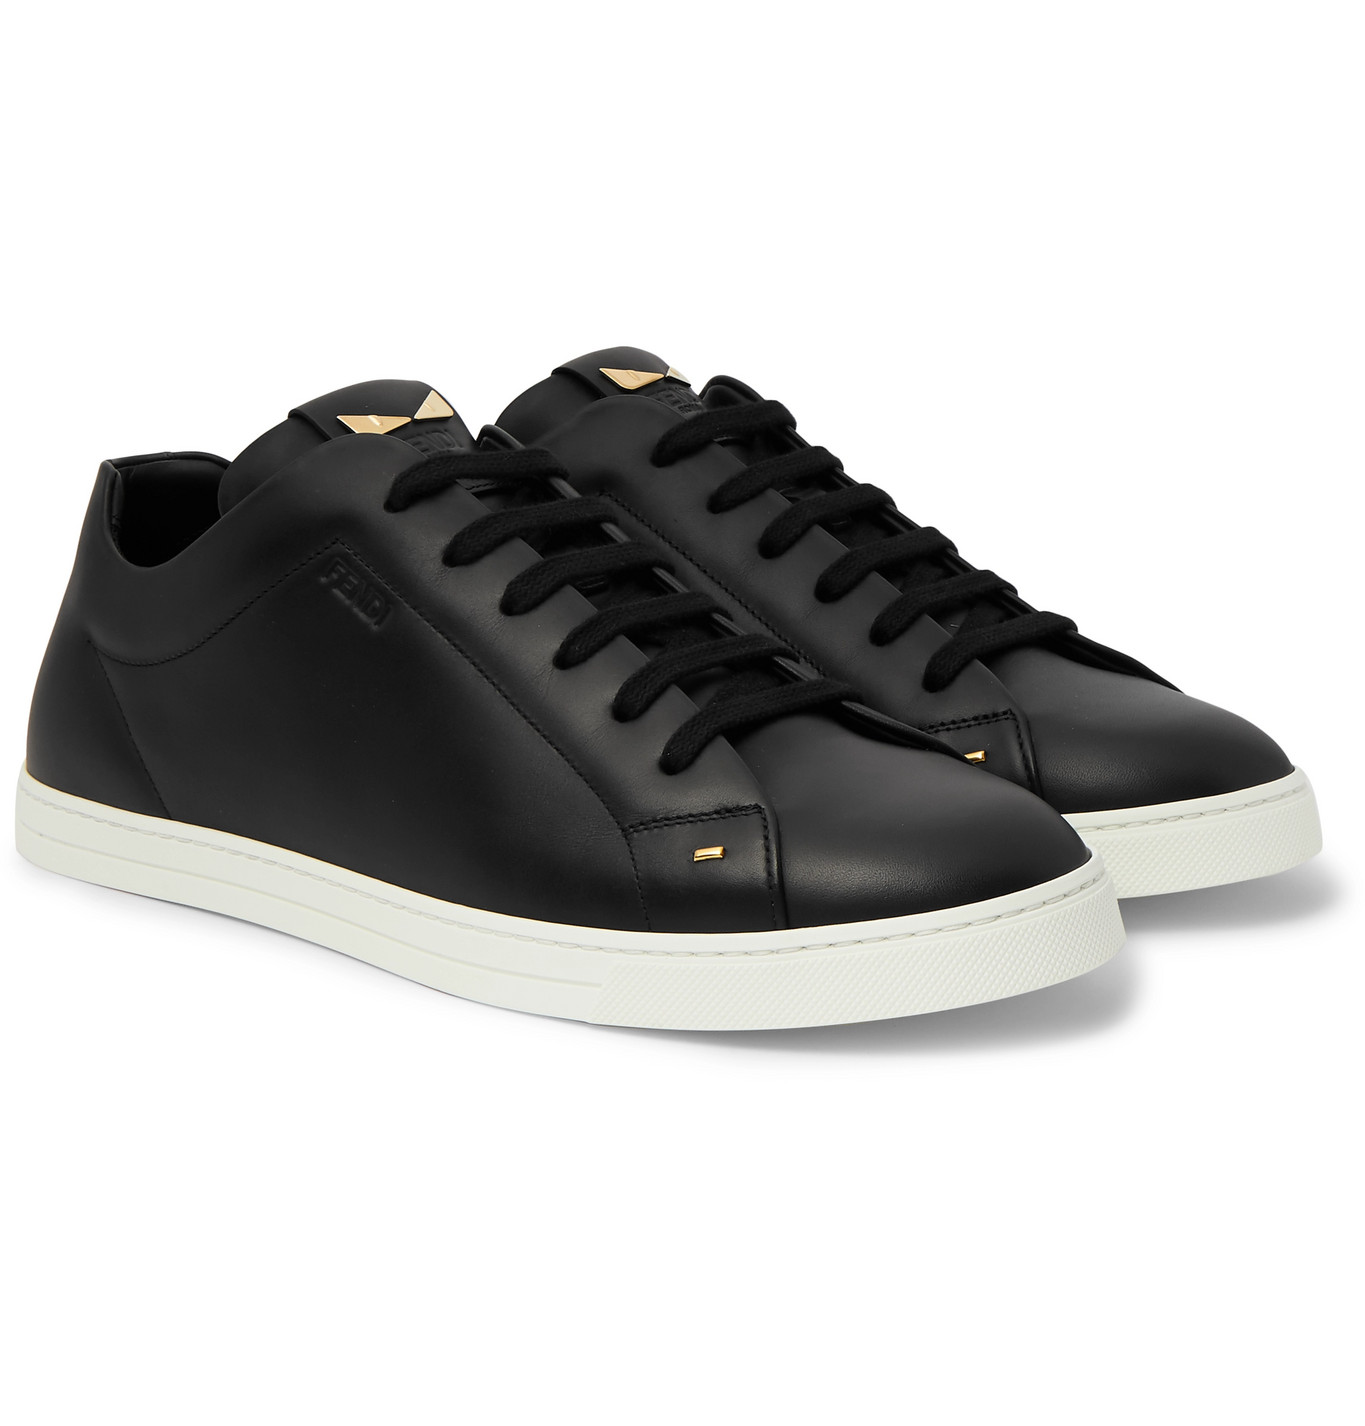 Fendi - I See You Embellished Leather Sneakers - Men - Black | The ...